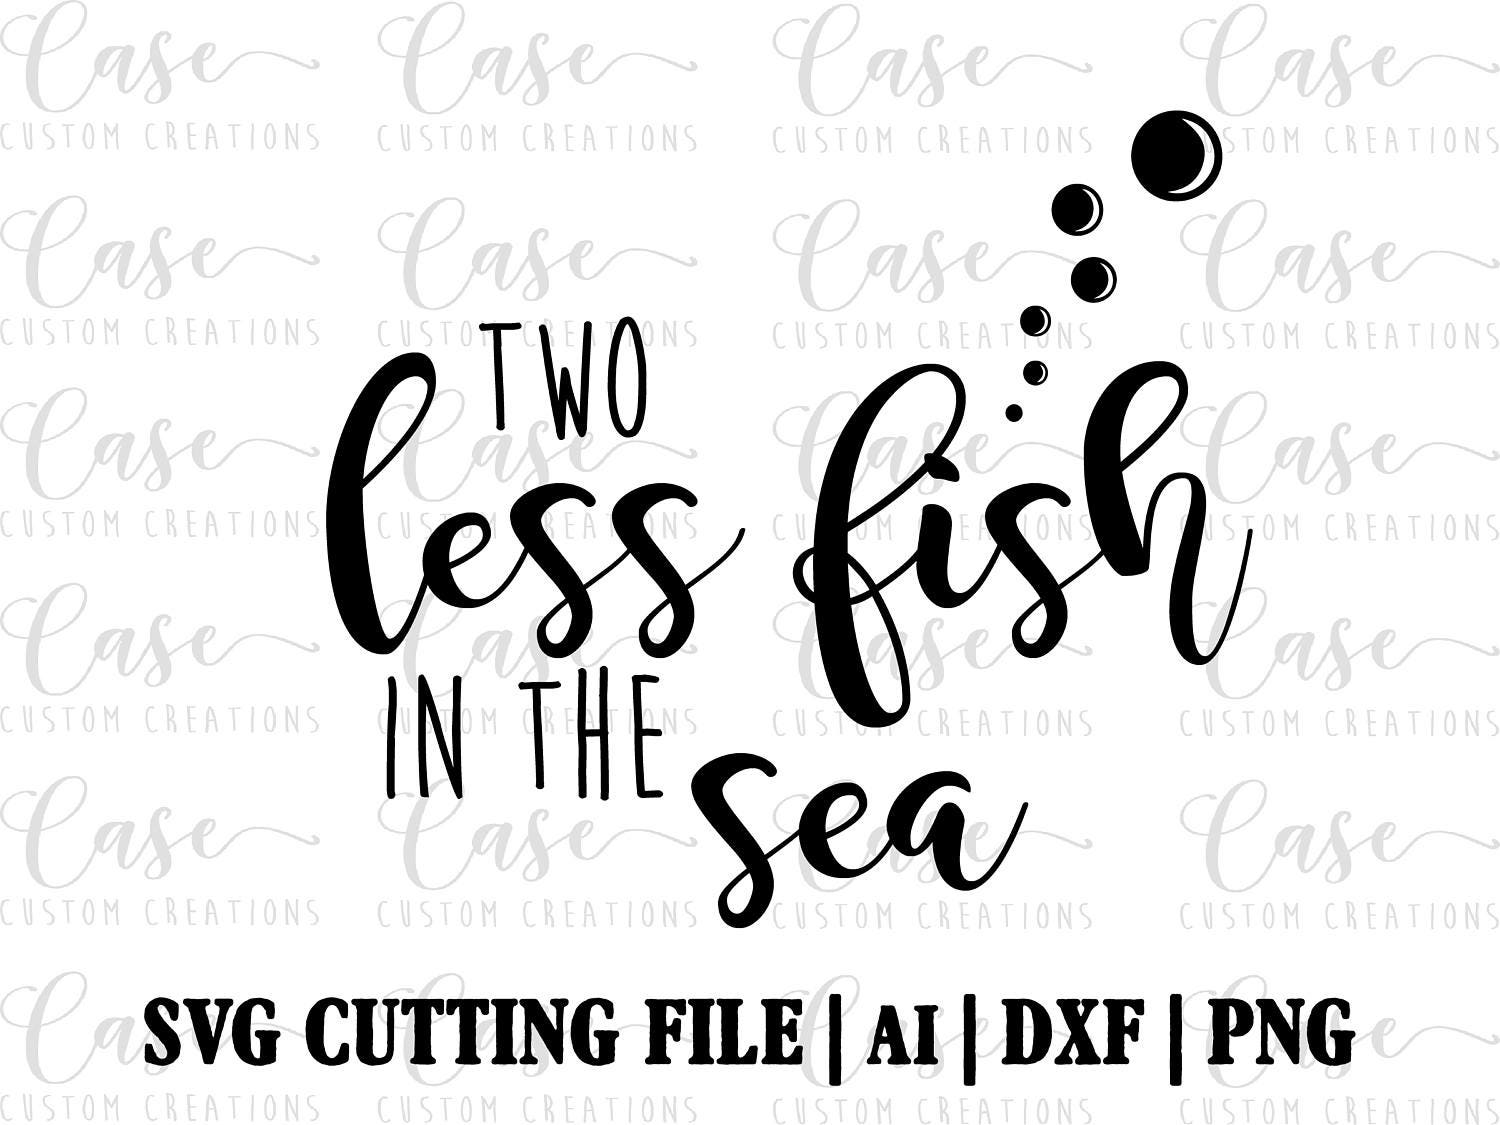 Download Two Less Fish in the Sea SVG Cutting File ai dxf and png